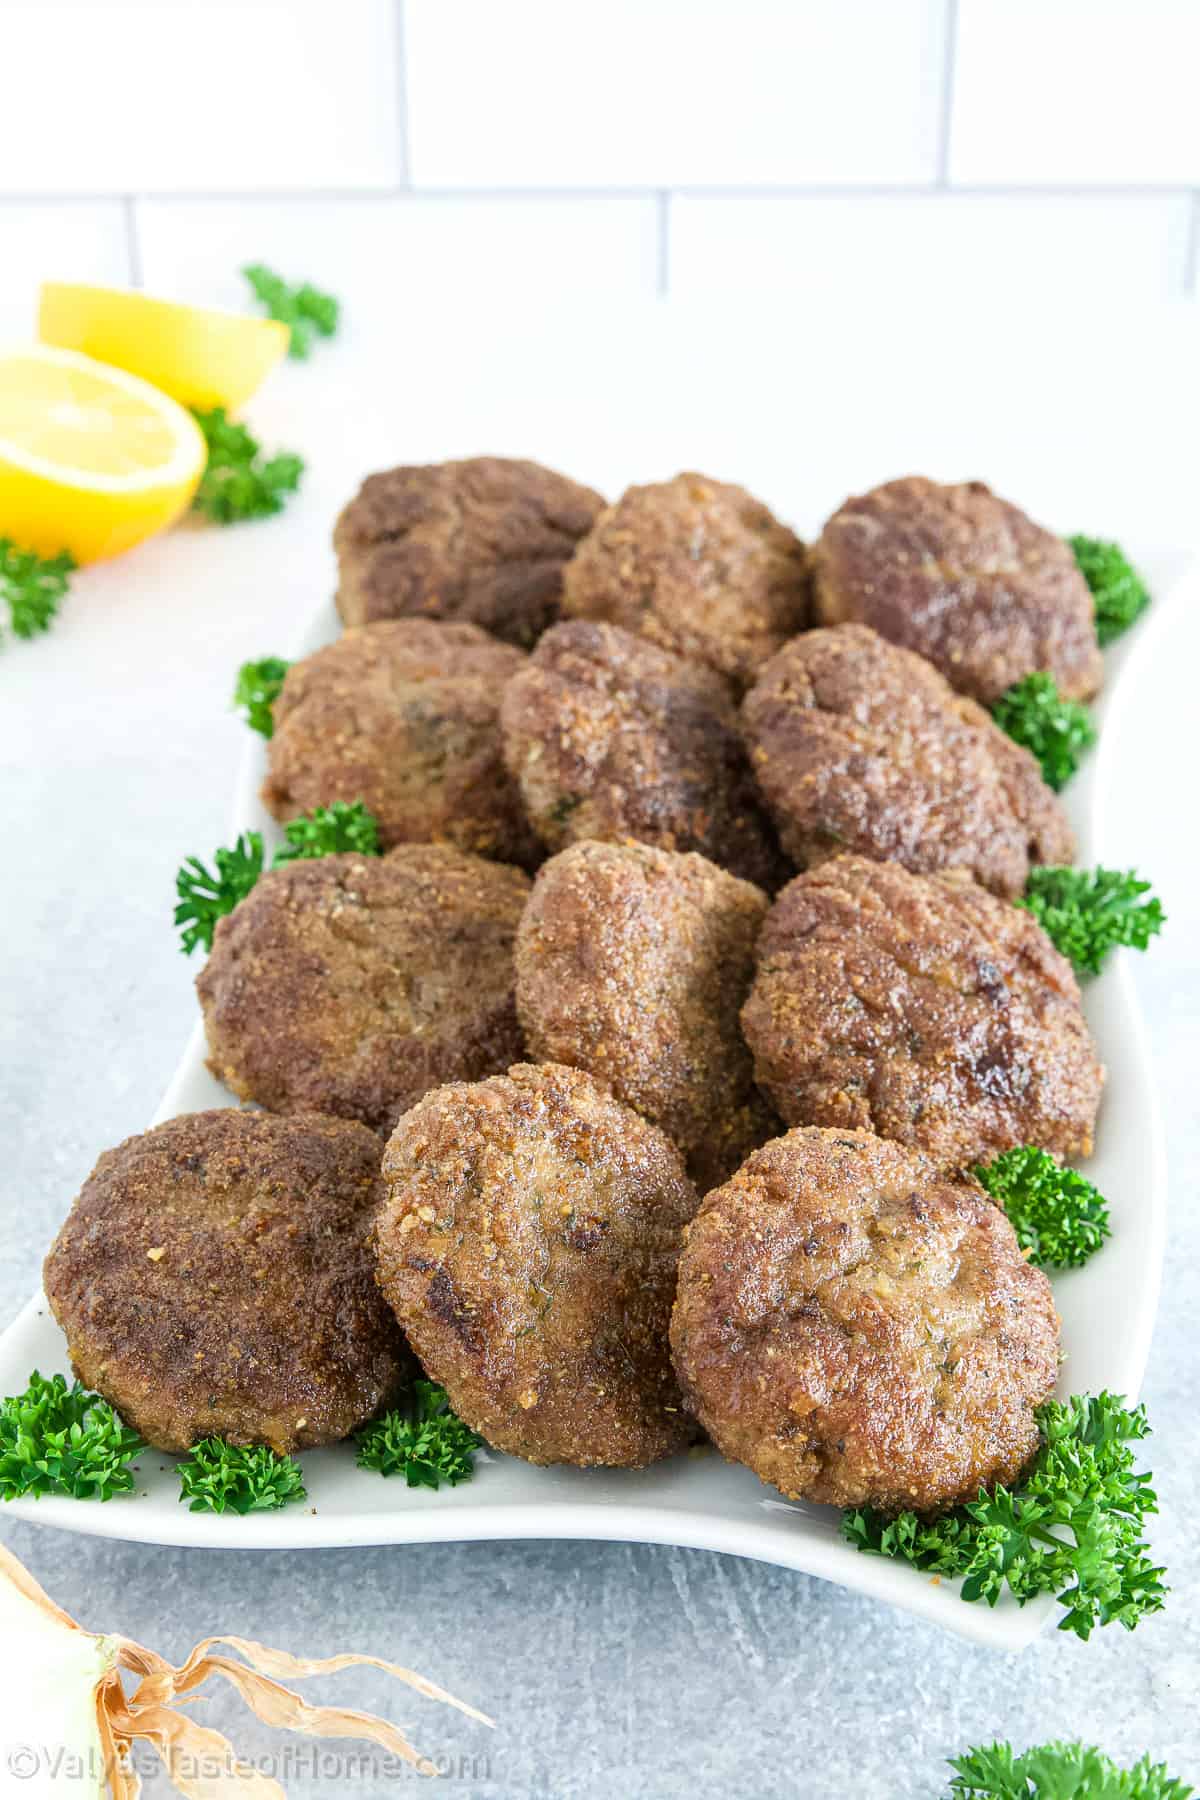 These crispy and savory meat patties are made with ground beef, bread crumbs, spices, and other flavorful ingredients for a tasty meal for the whole family.